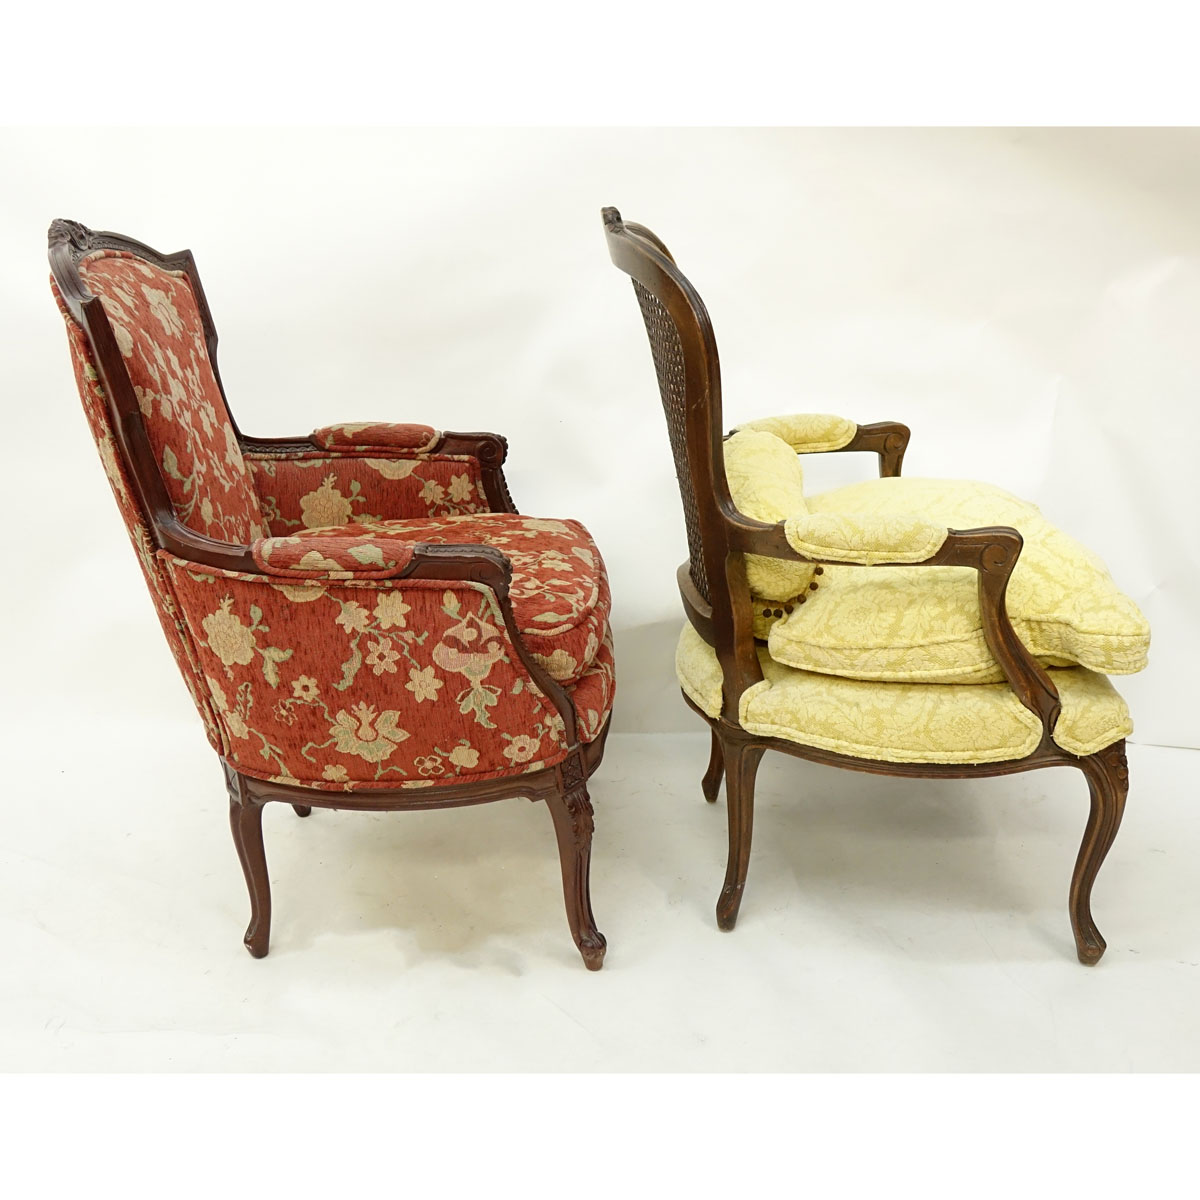 Two (2) 20th Century French Carved Louis XV style Chairs, Fauteuil with Cane Back and Bergere. Unsigned.